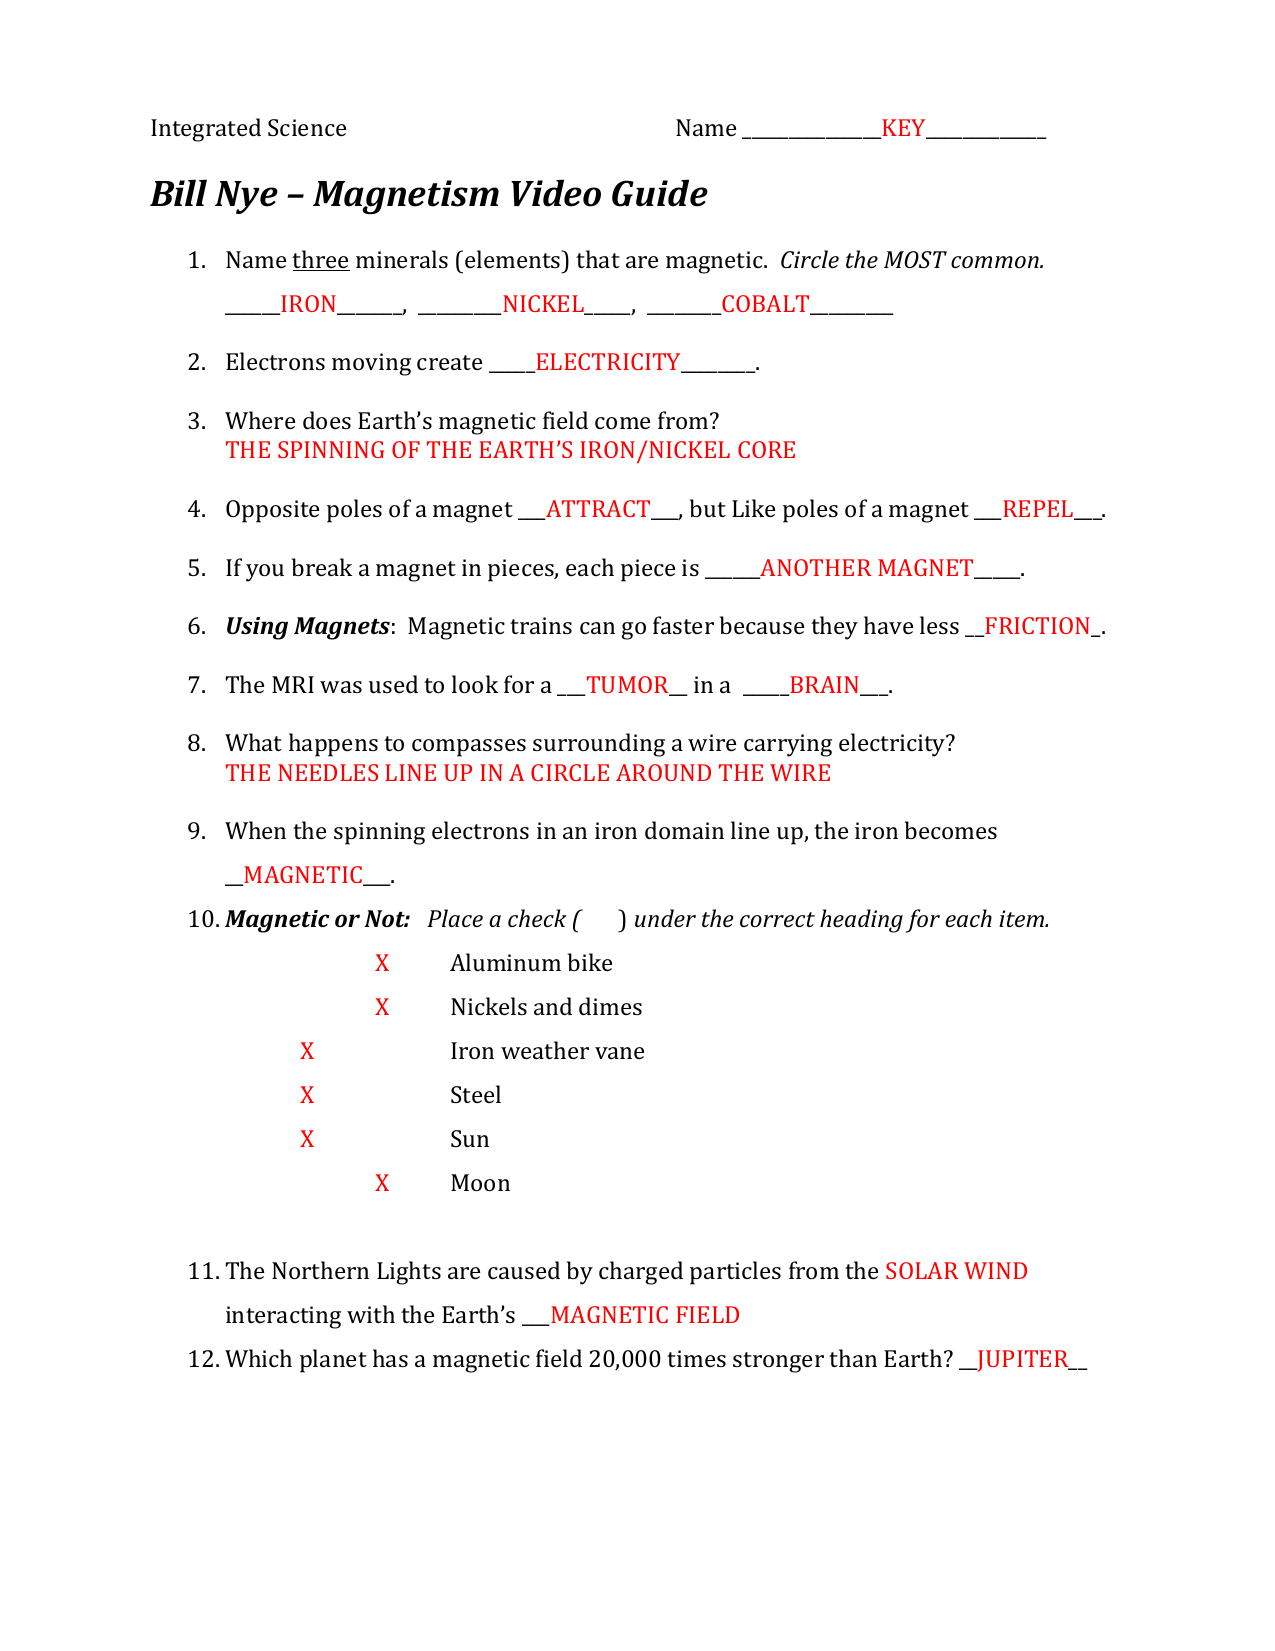 magnetism worksheet answers Cheaper Than Retail Price> Buy Intended For Bill Nye Magnetism Worksheet Answers